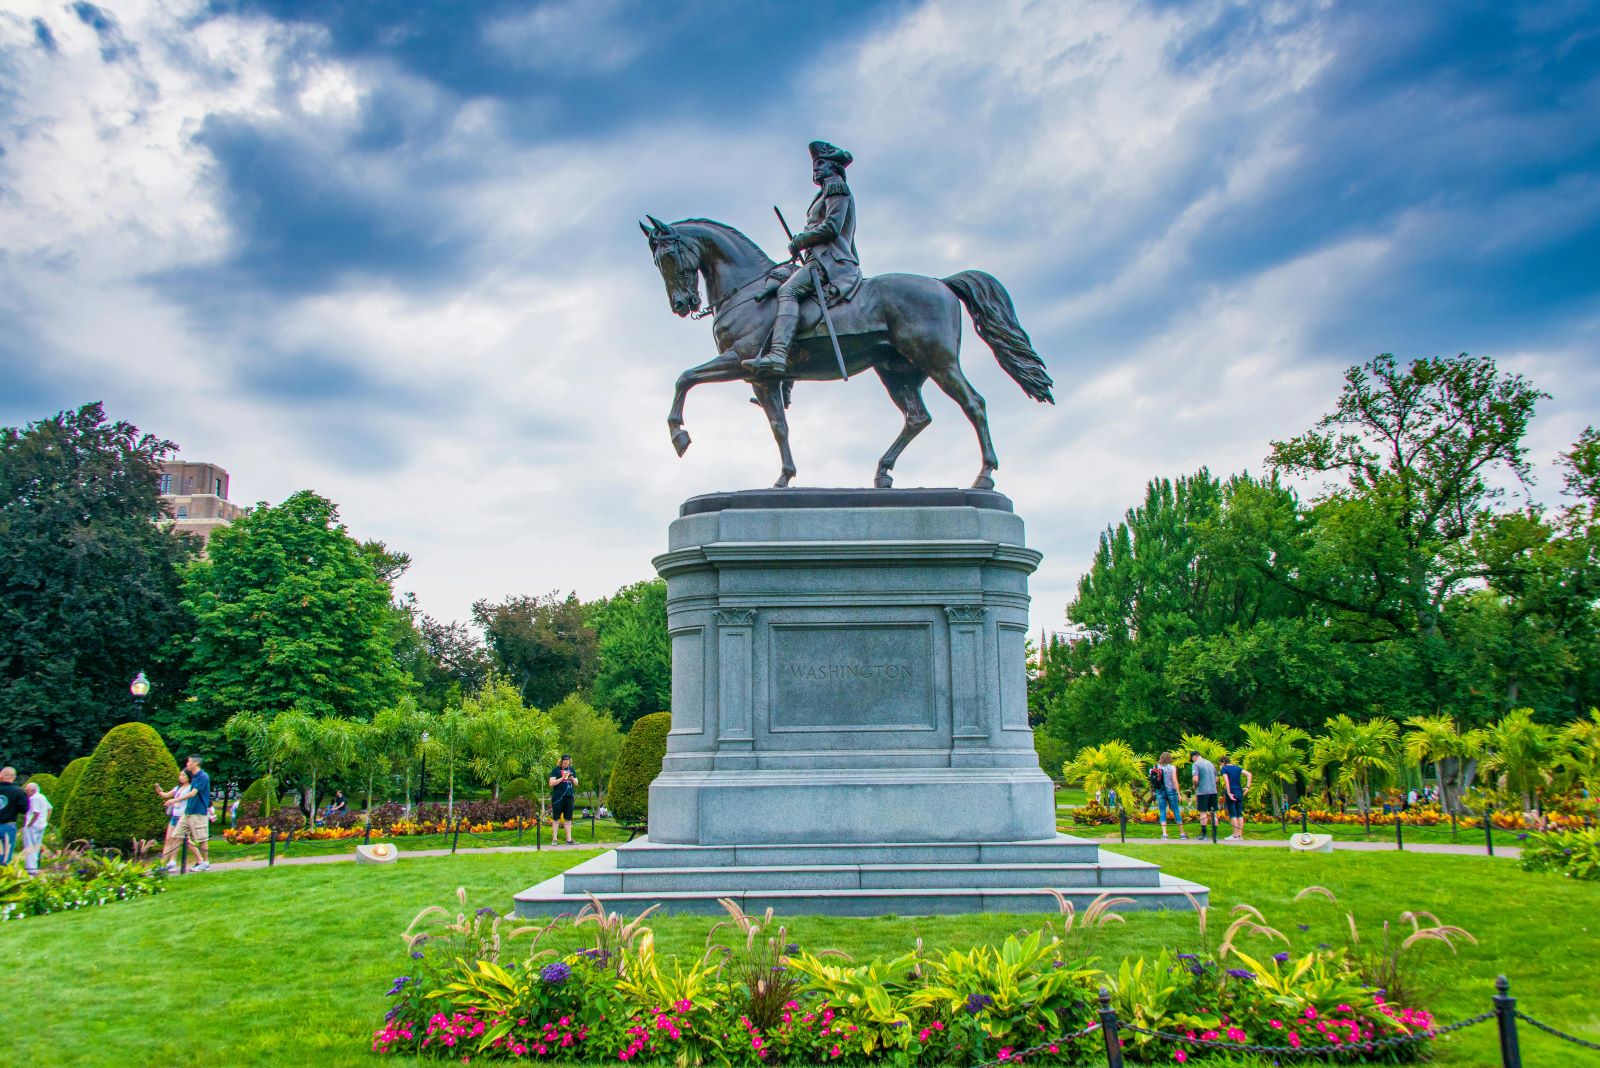 <p class="wp-caption-text">Image Credit: Pexels / Mohan Nannapaneni</p>  <p>Boston Common is America’s oldest public park. It has served many purposes from a camp for British troops to a gathering place for public speeches and celebrations.</p>